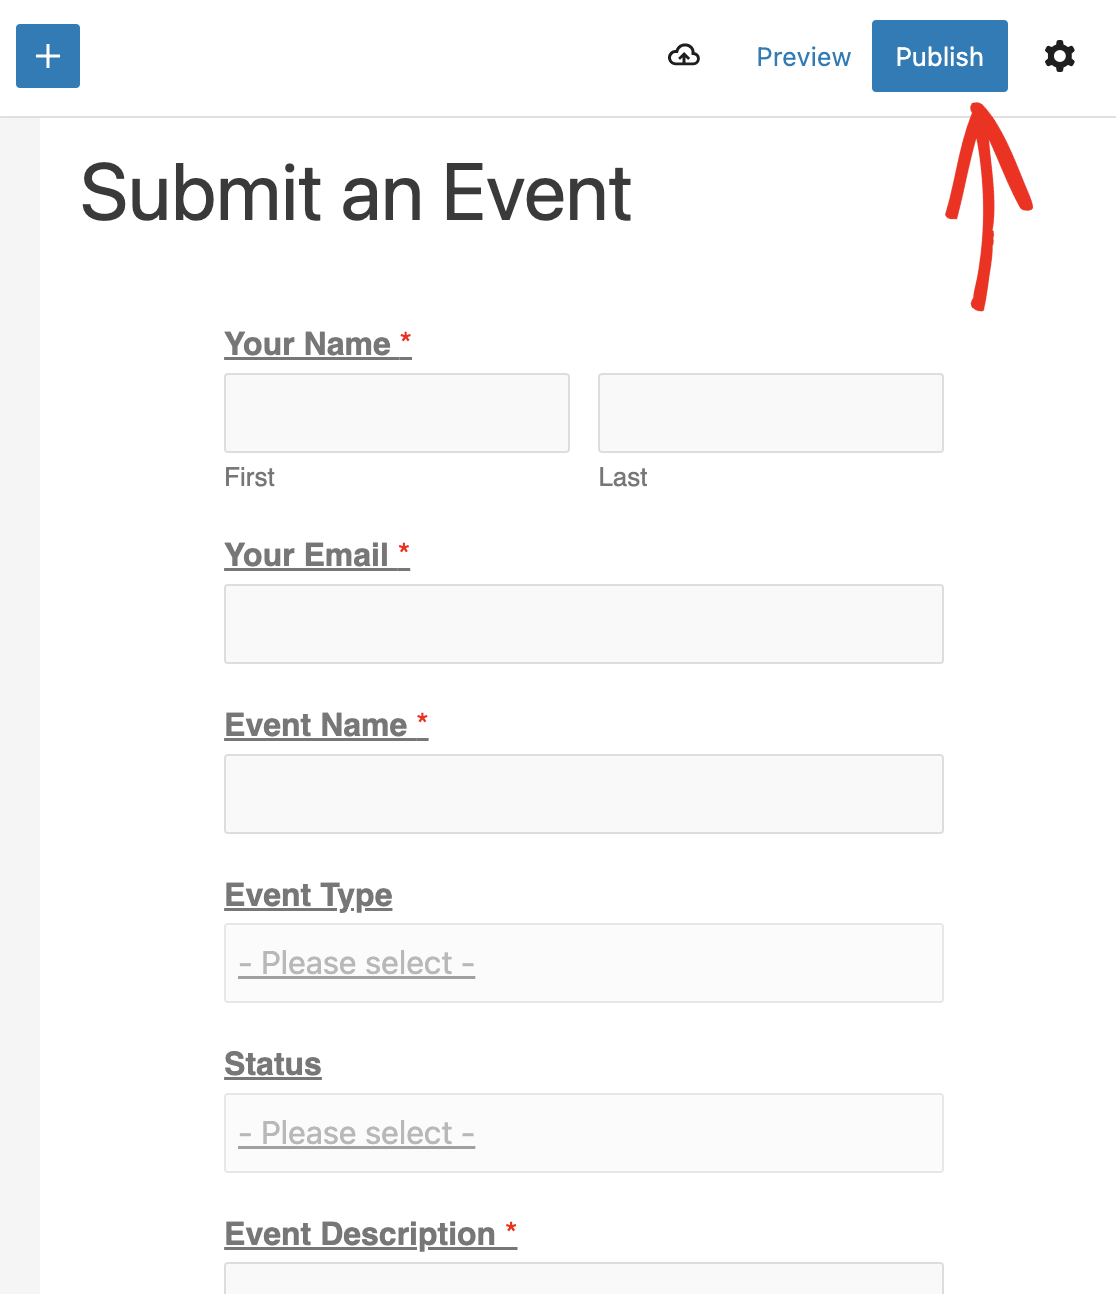 Publishing an Event Planner form